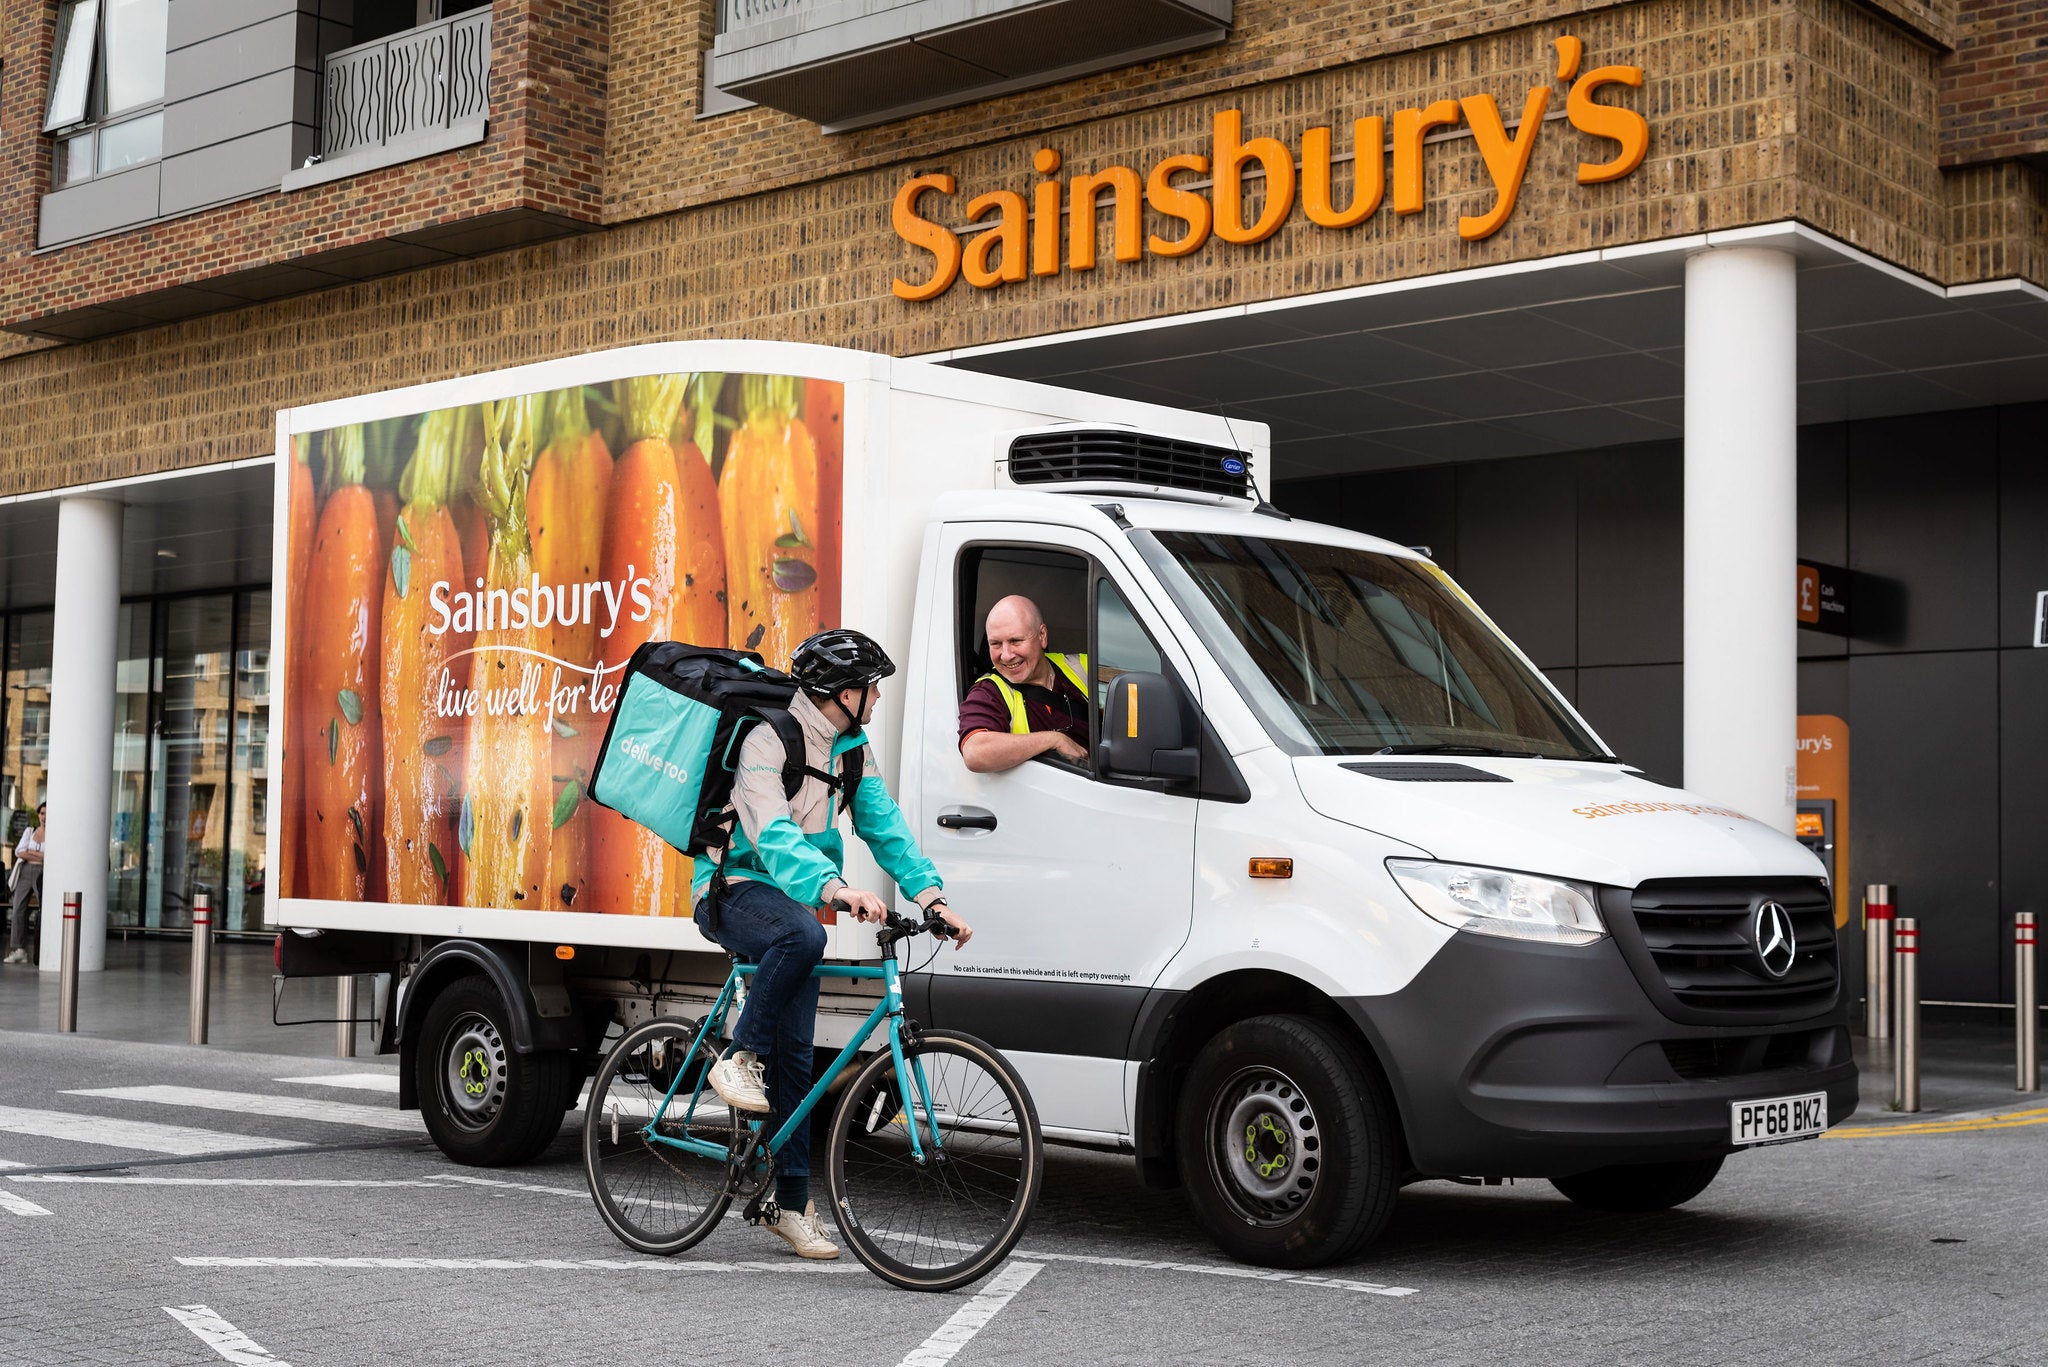 Grocery delivery is Deliveroo's fastest-growing business segment